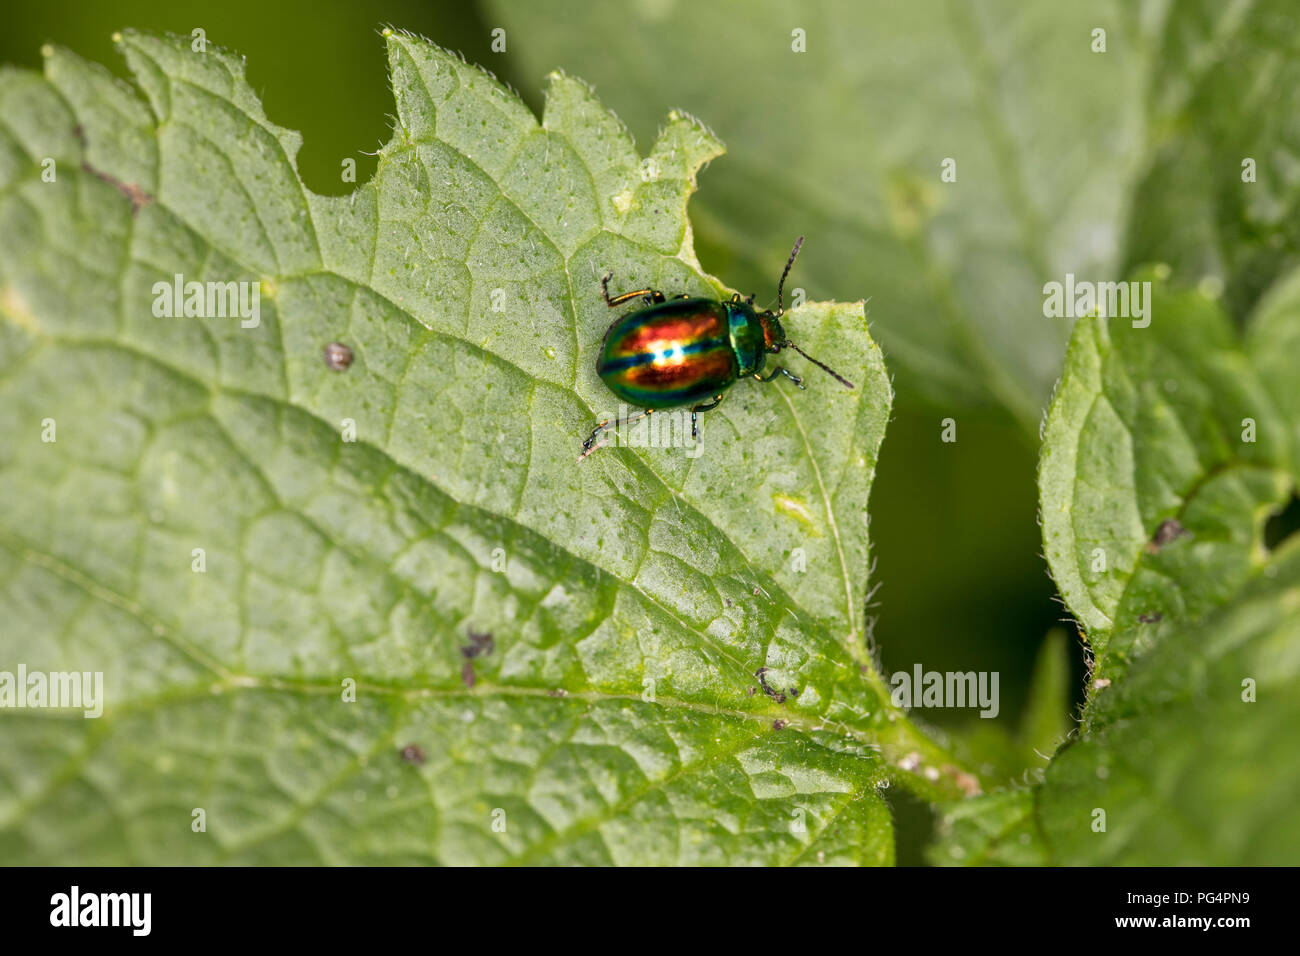 Chrysolina fastuosa, colorful beetle wanders on a green leaf, view from above Stock Photo